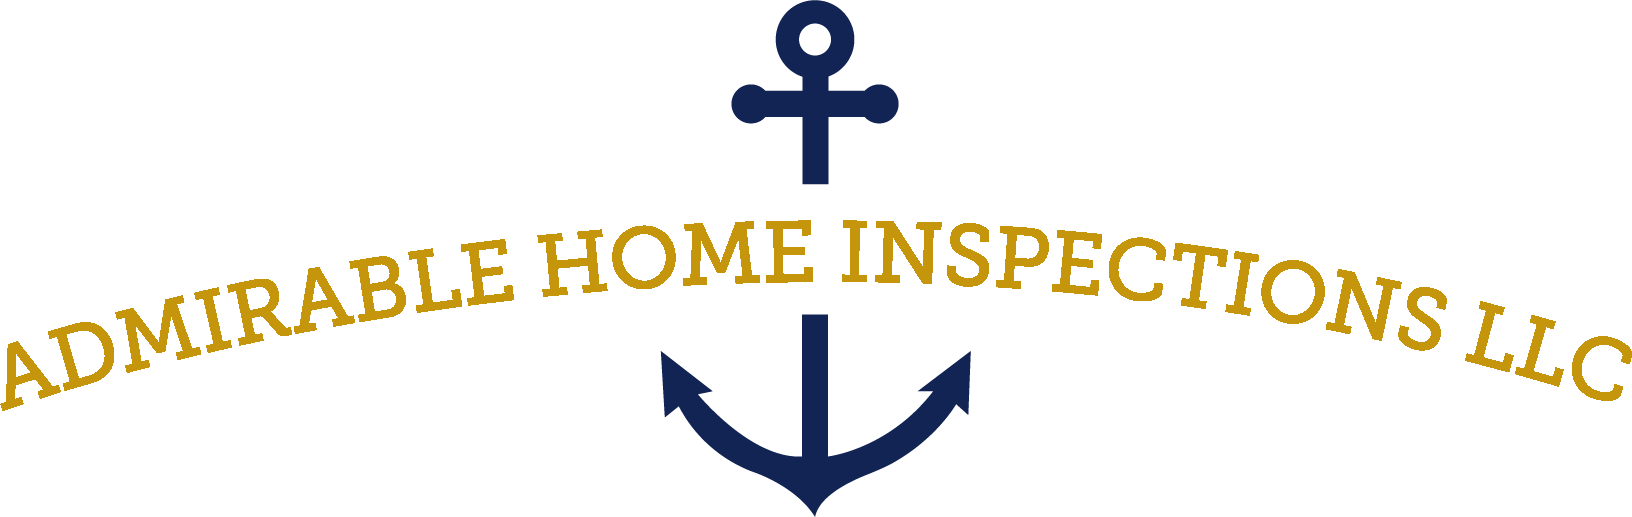 Admirable Home Inspections fixed logo with gold and blue